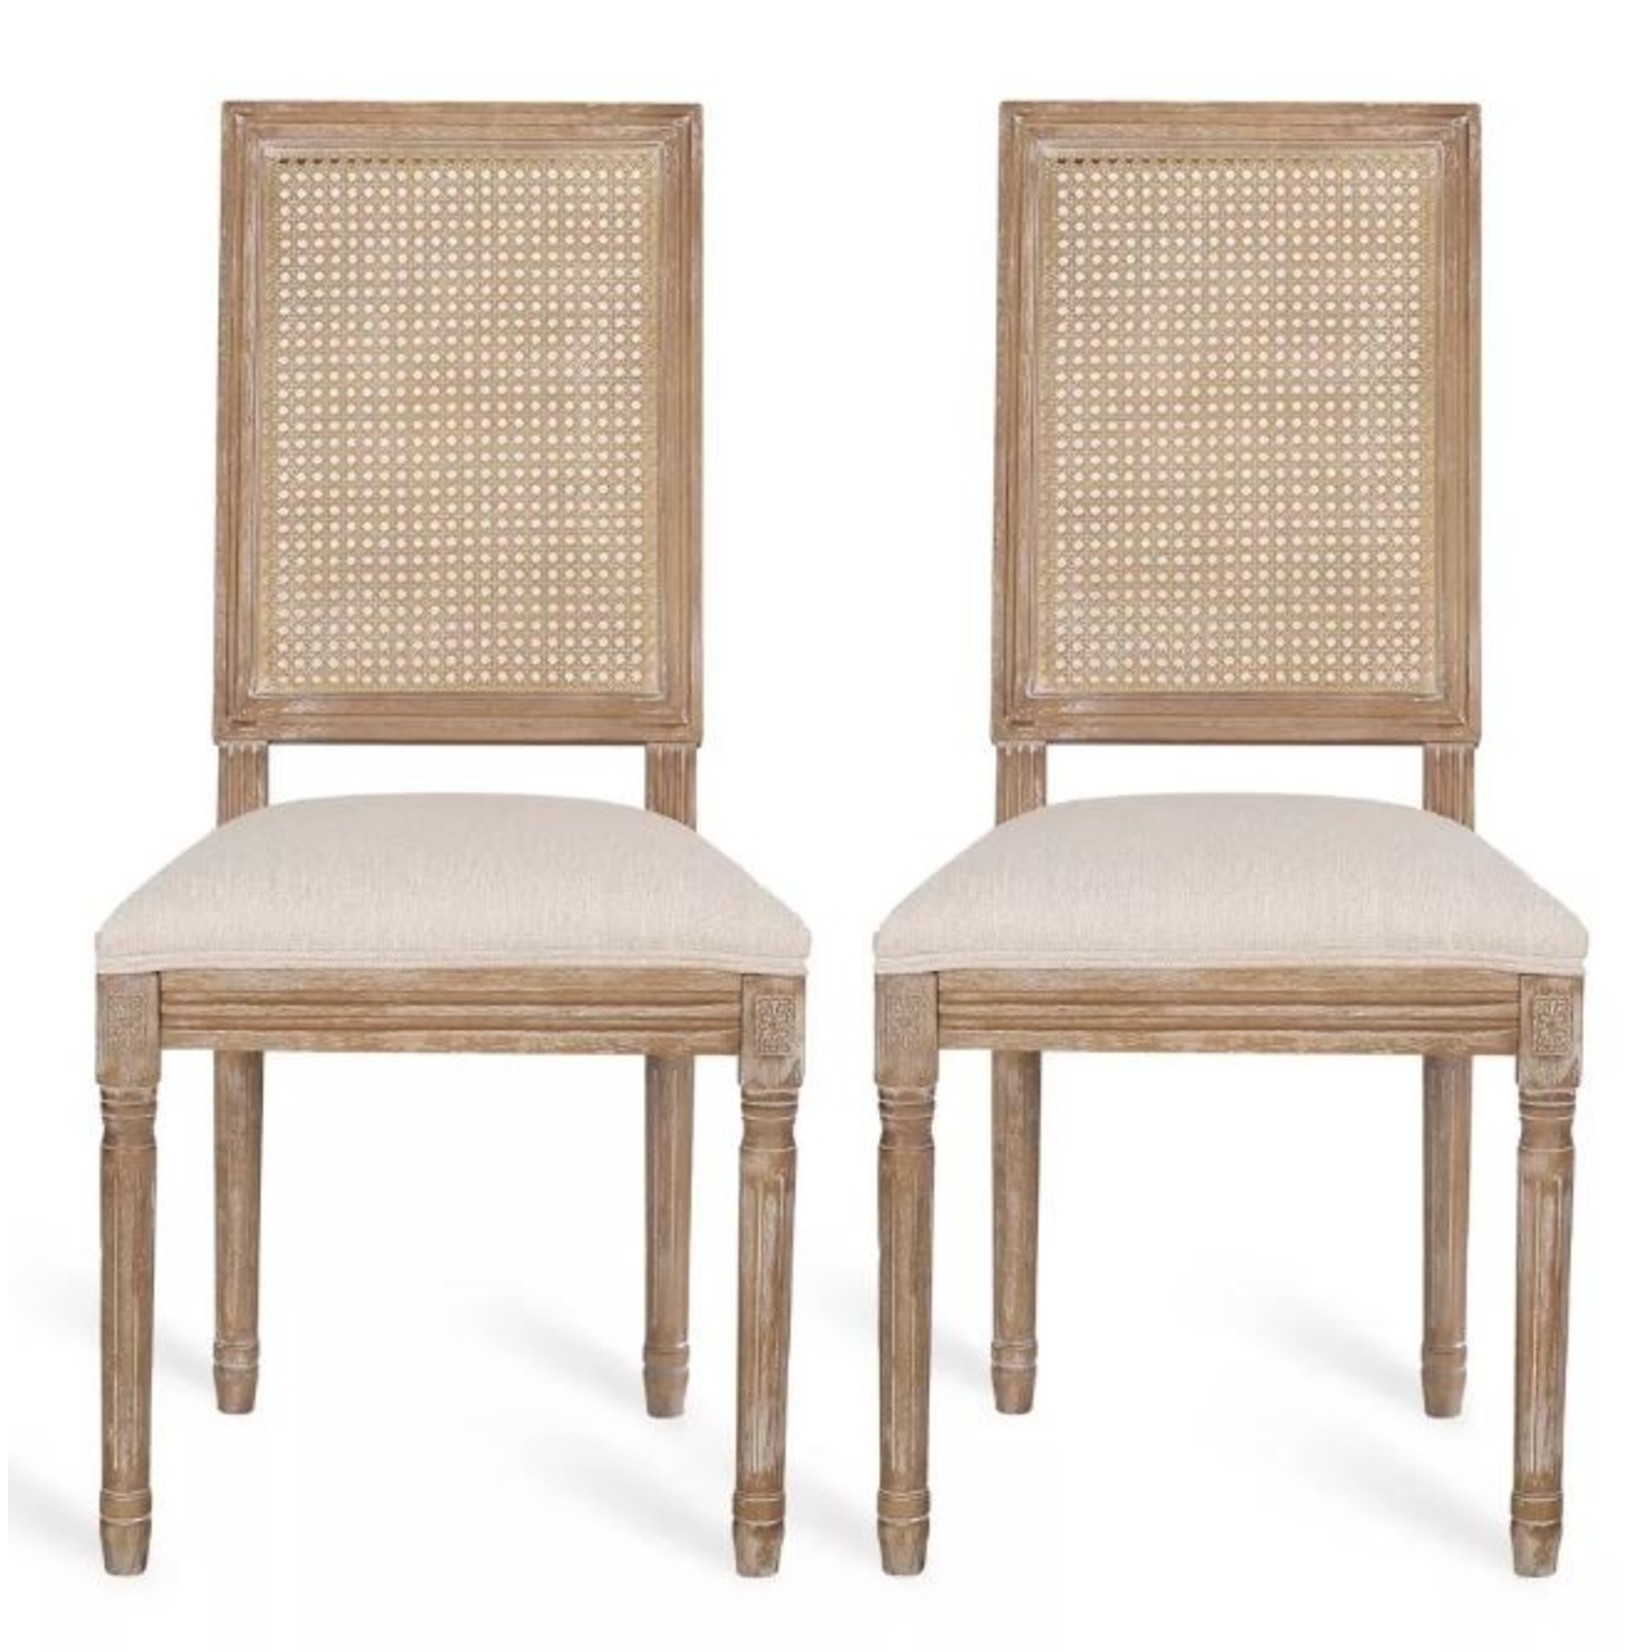 Nova Set of 2 Regina French Country Wood and Cane Upholstered Dining Chairs